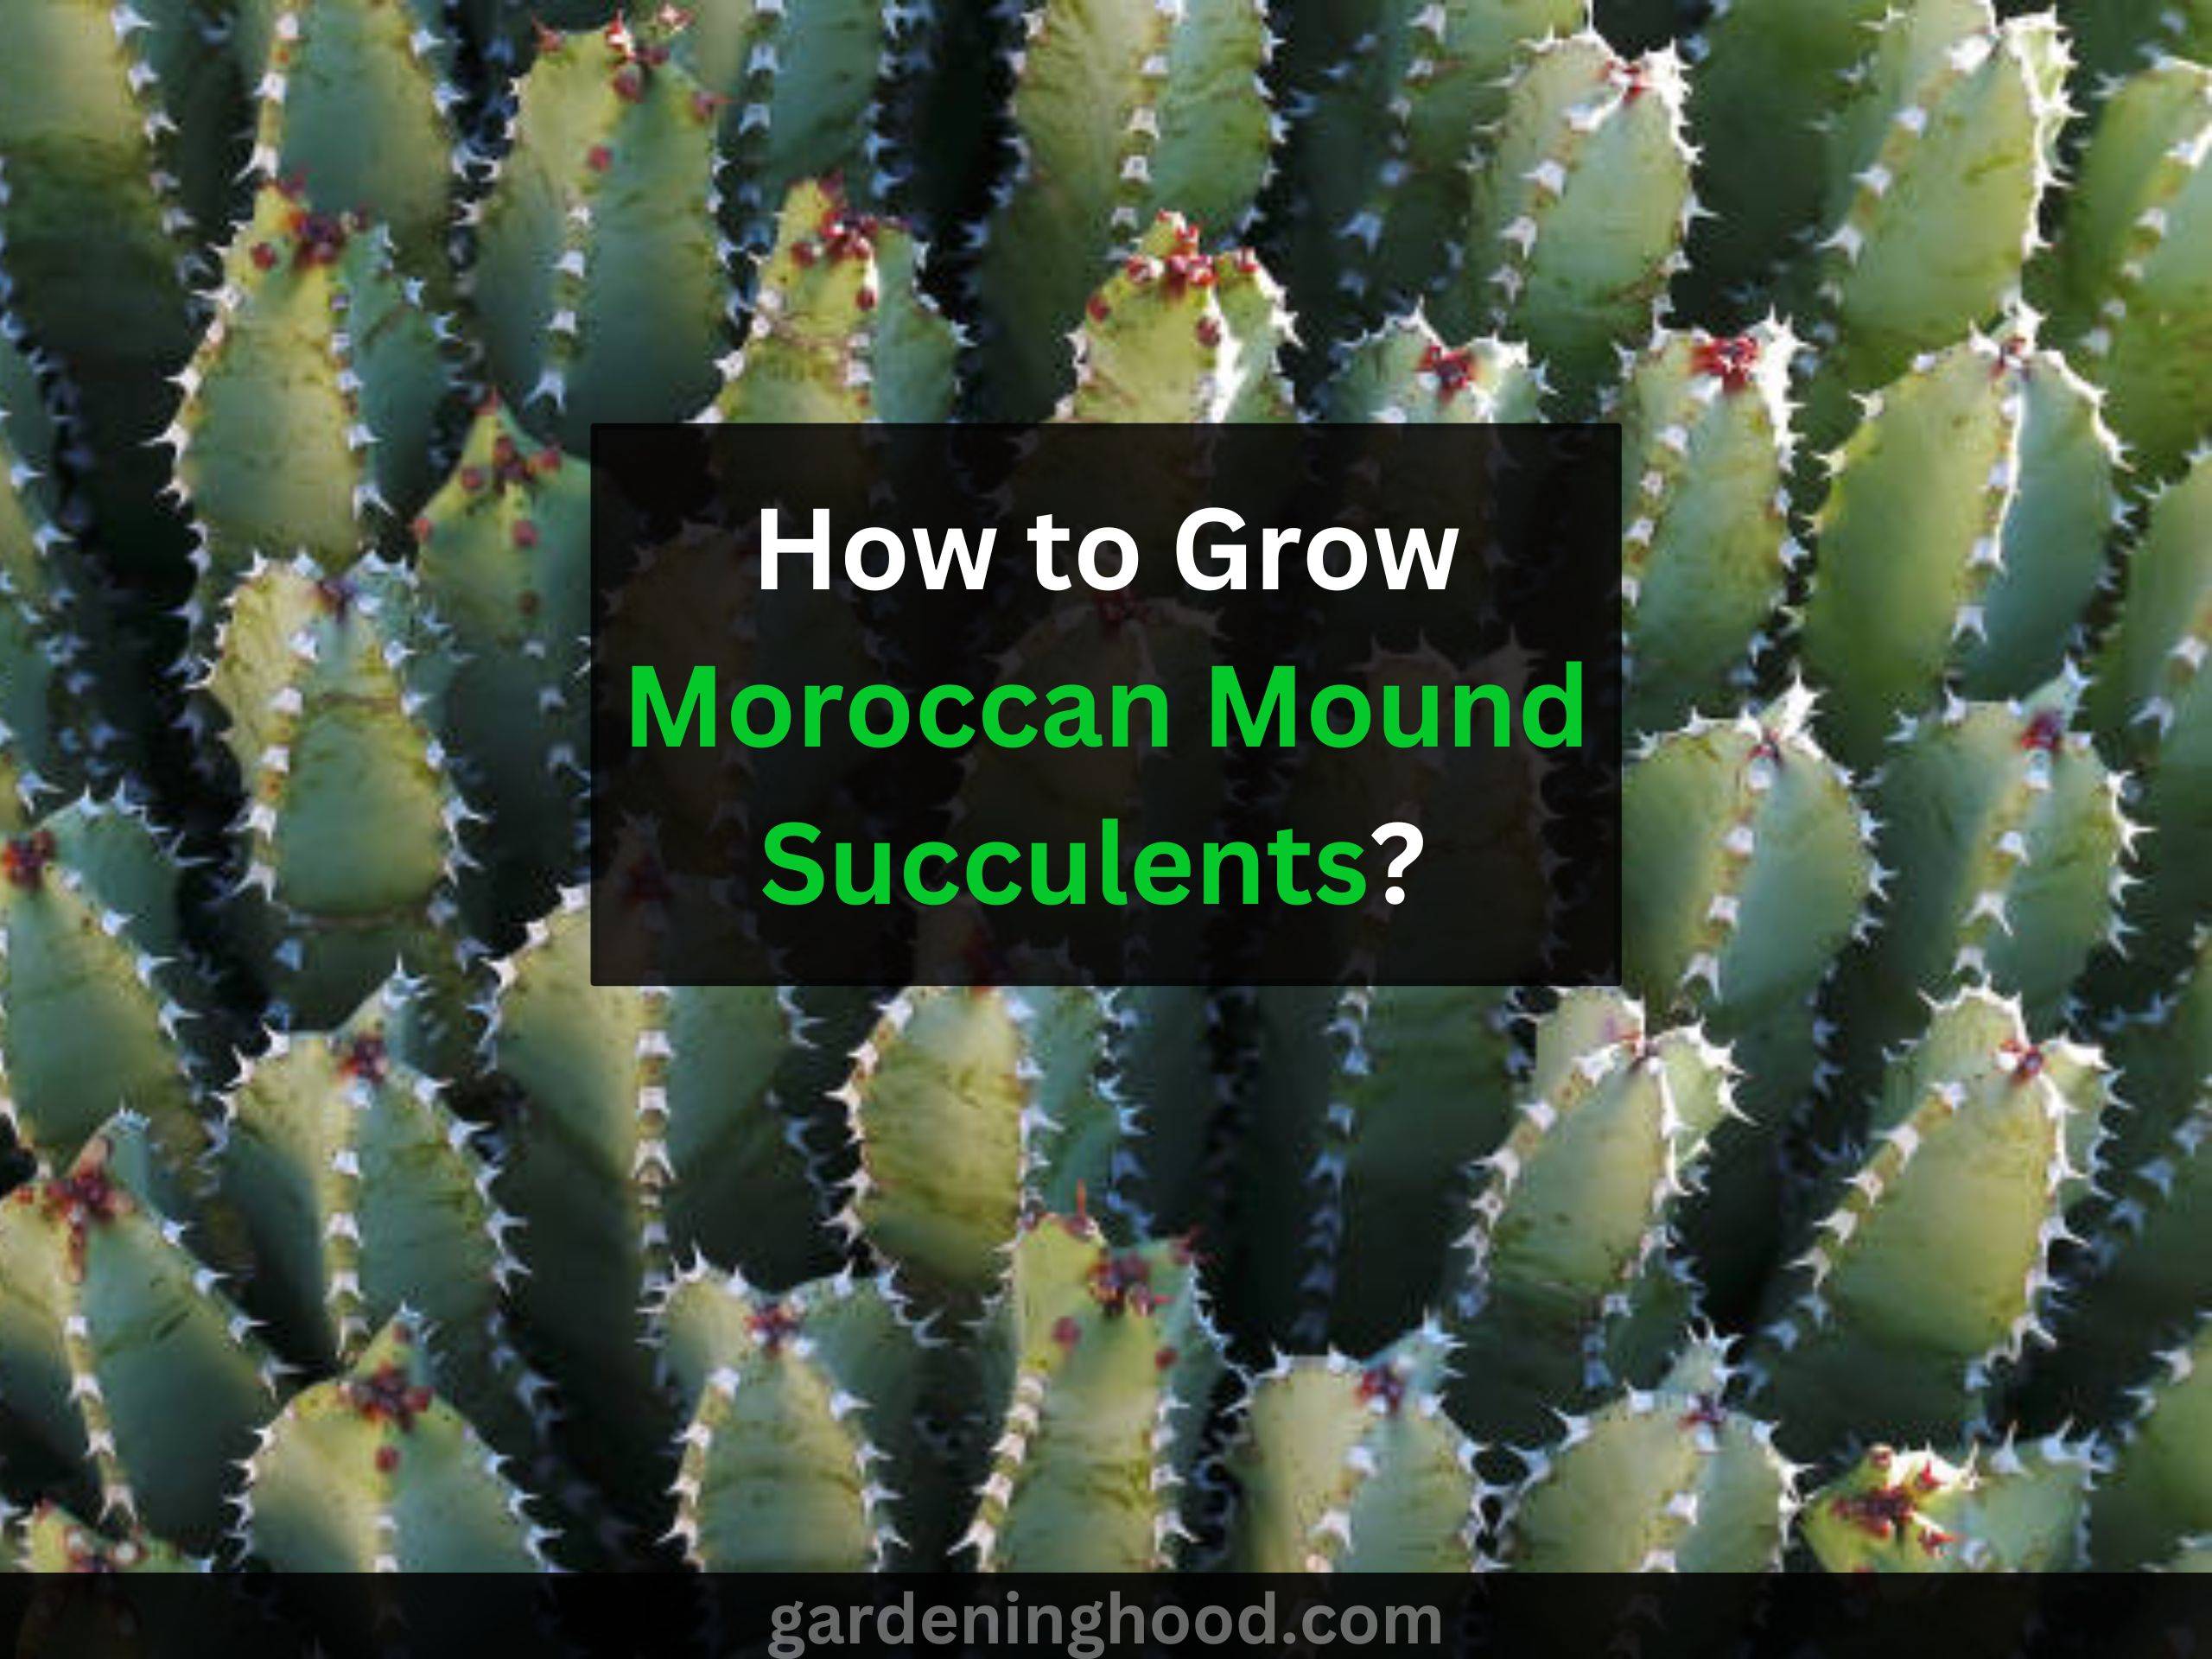 How to Grow Moroccan Mound Succulents – Care & Propagate ‘Euphorbia resinifera’ plants? –